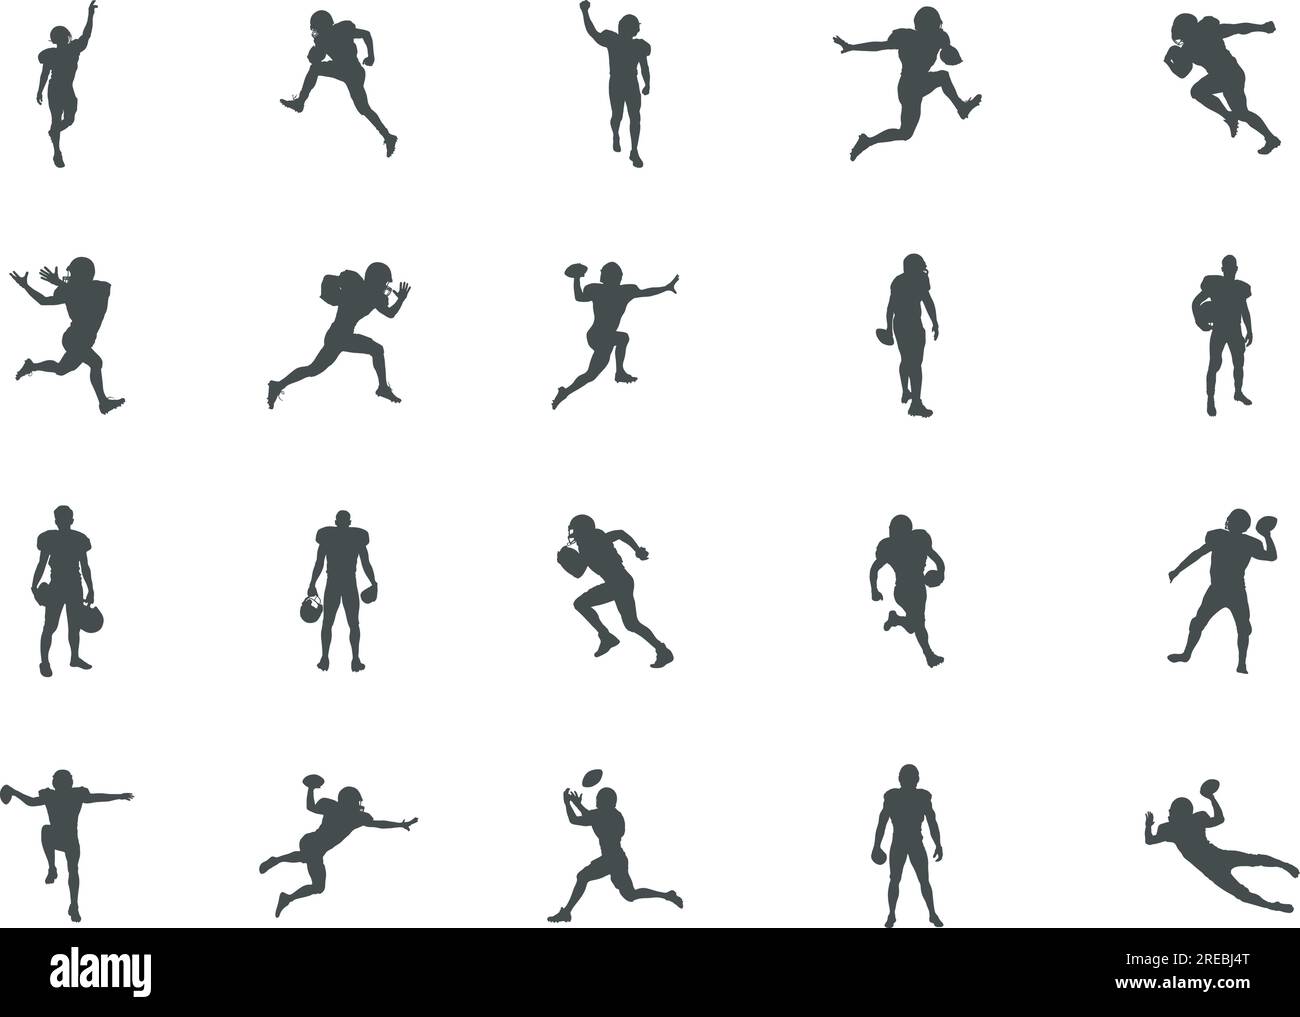 American Football Player Silhouettes, Football Silhouettes, Player ...